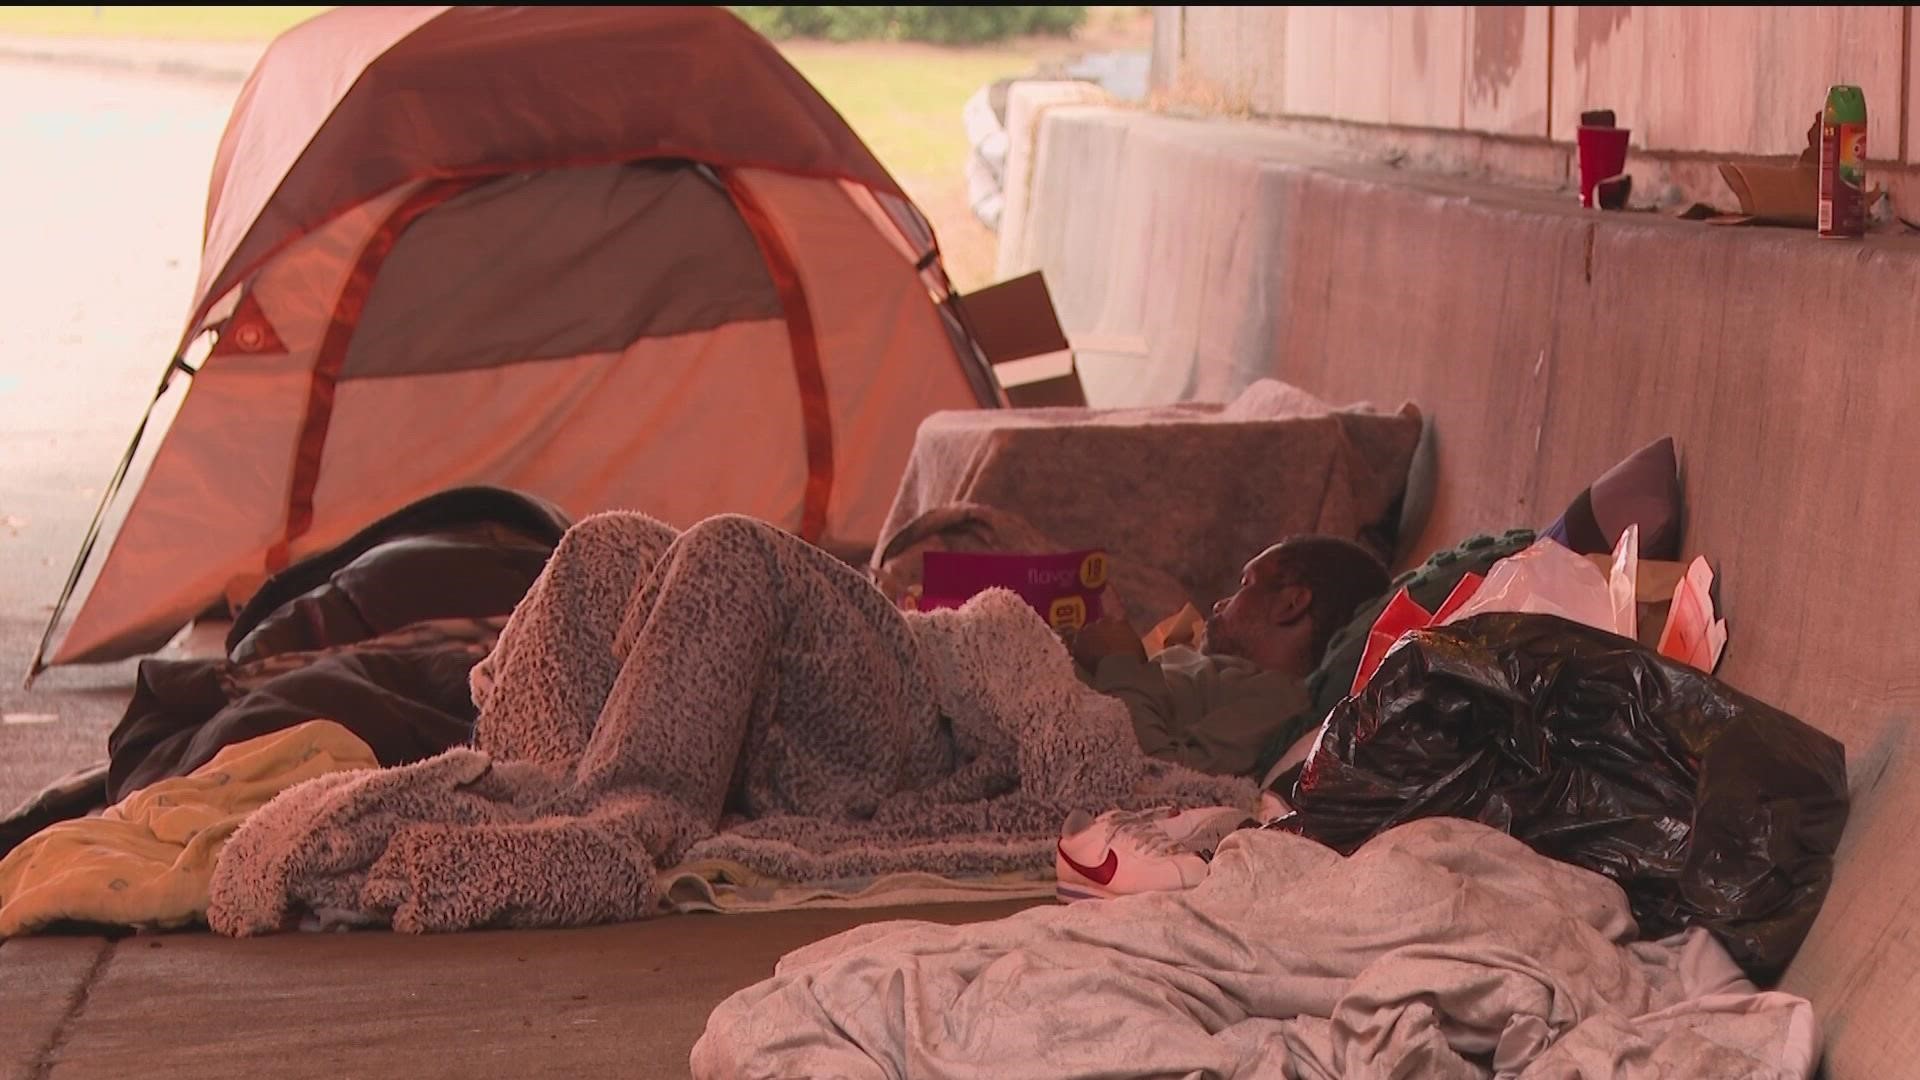 11Alive Investigators are examining why tents line Atlanta's freeways and why families struggle to find stable housing in their three-part series "The Way Home."